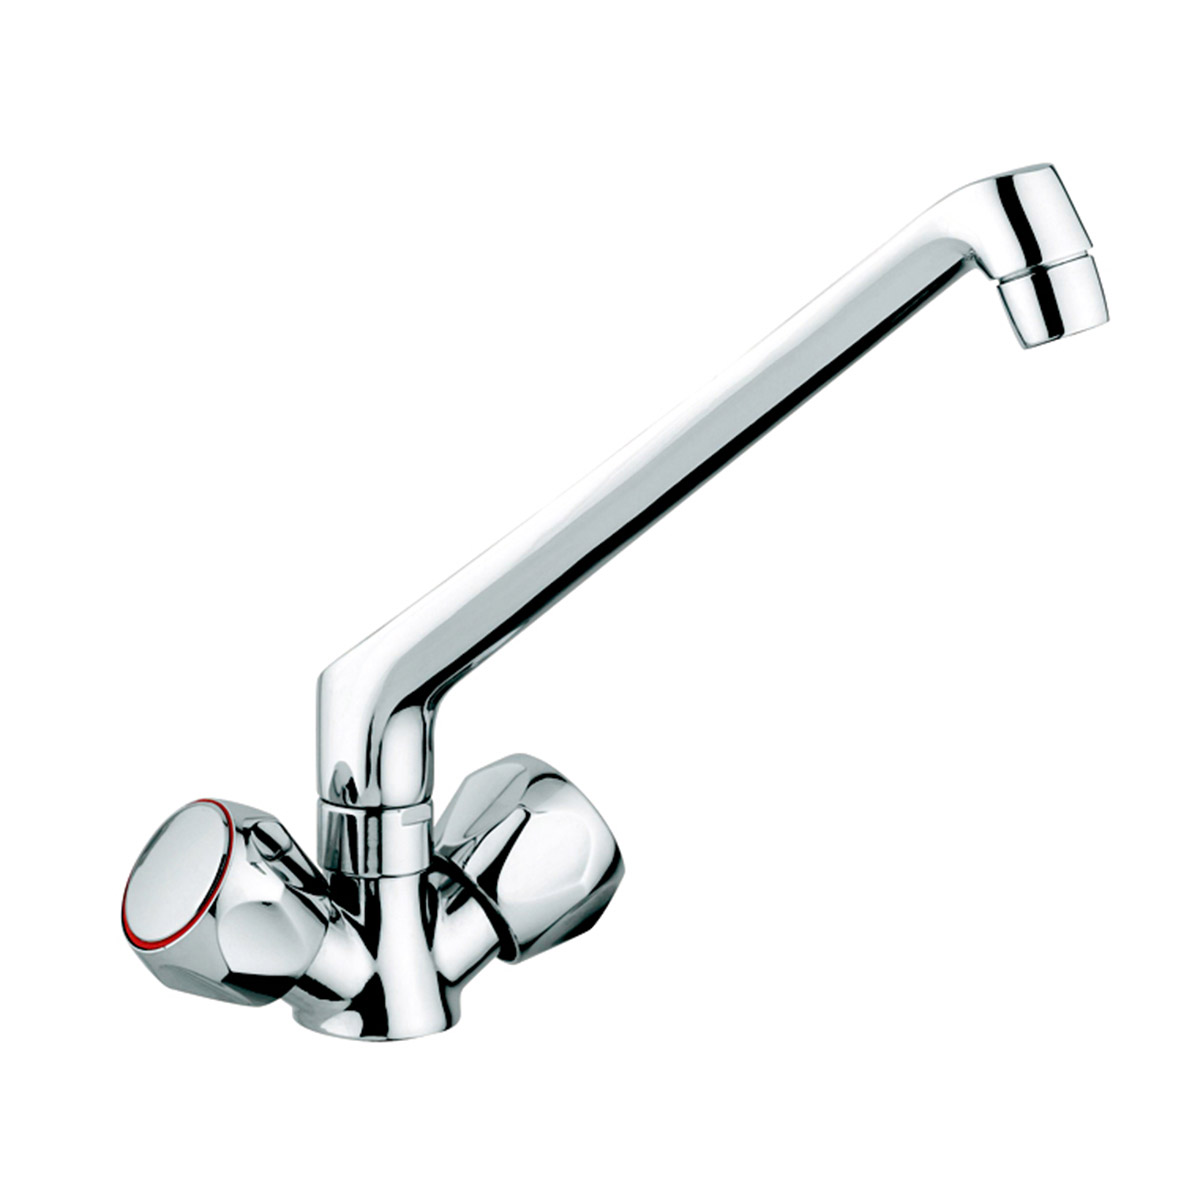 The Edith dual lever kitchen tap from Eirline is a striking single flow sink mixer that's available in chrome finish.